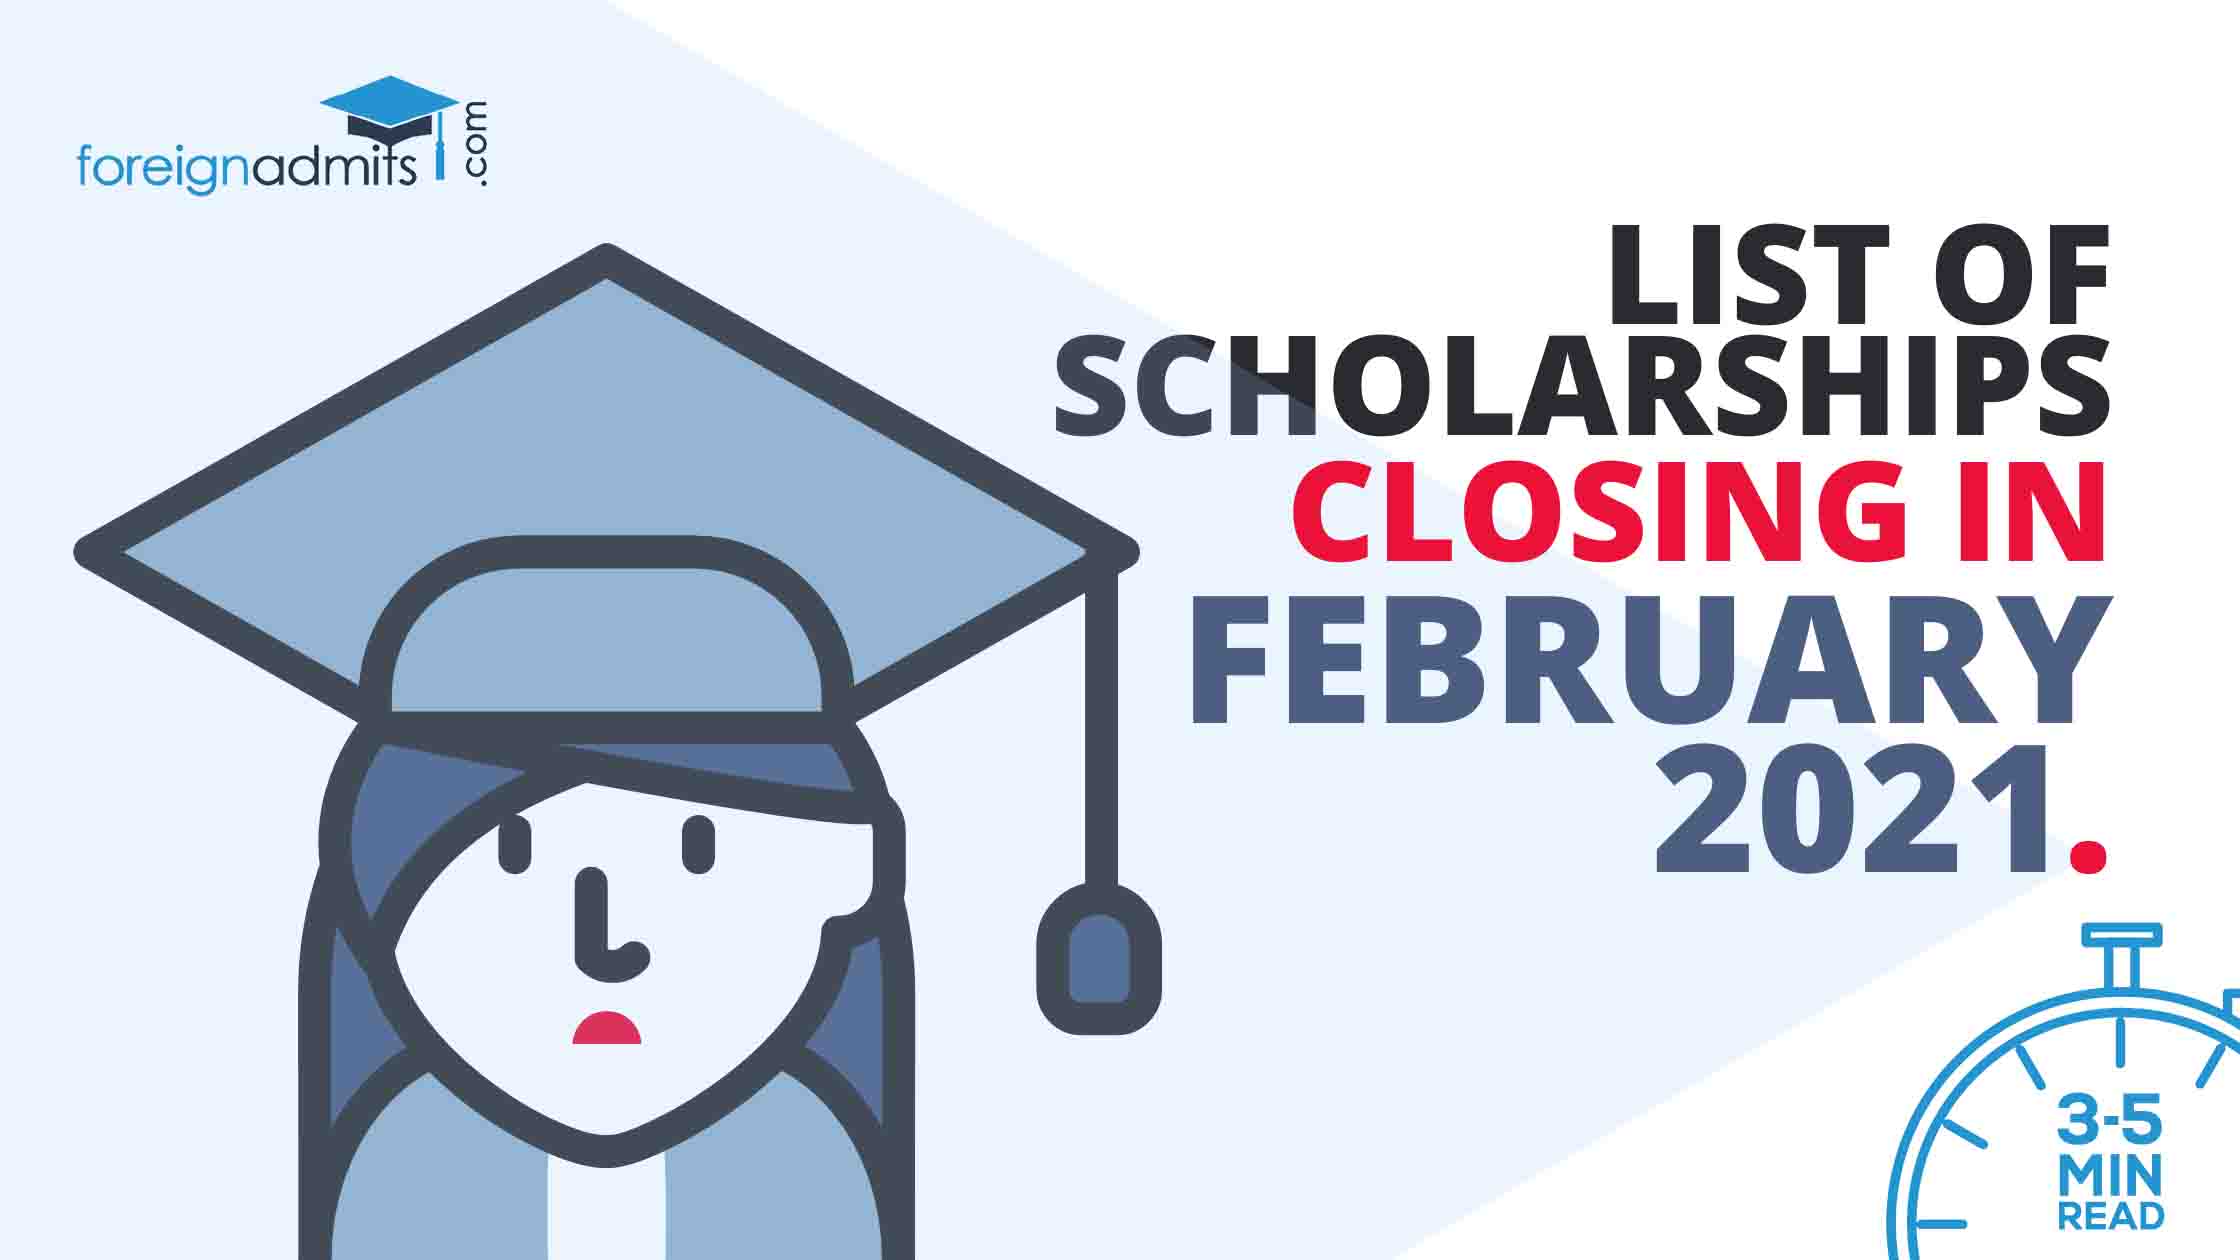 List of Scholarships Closing in February 2021